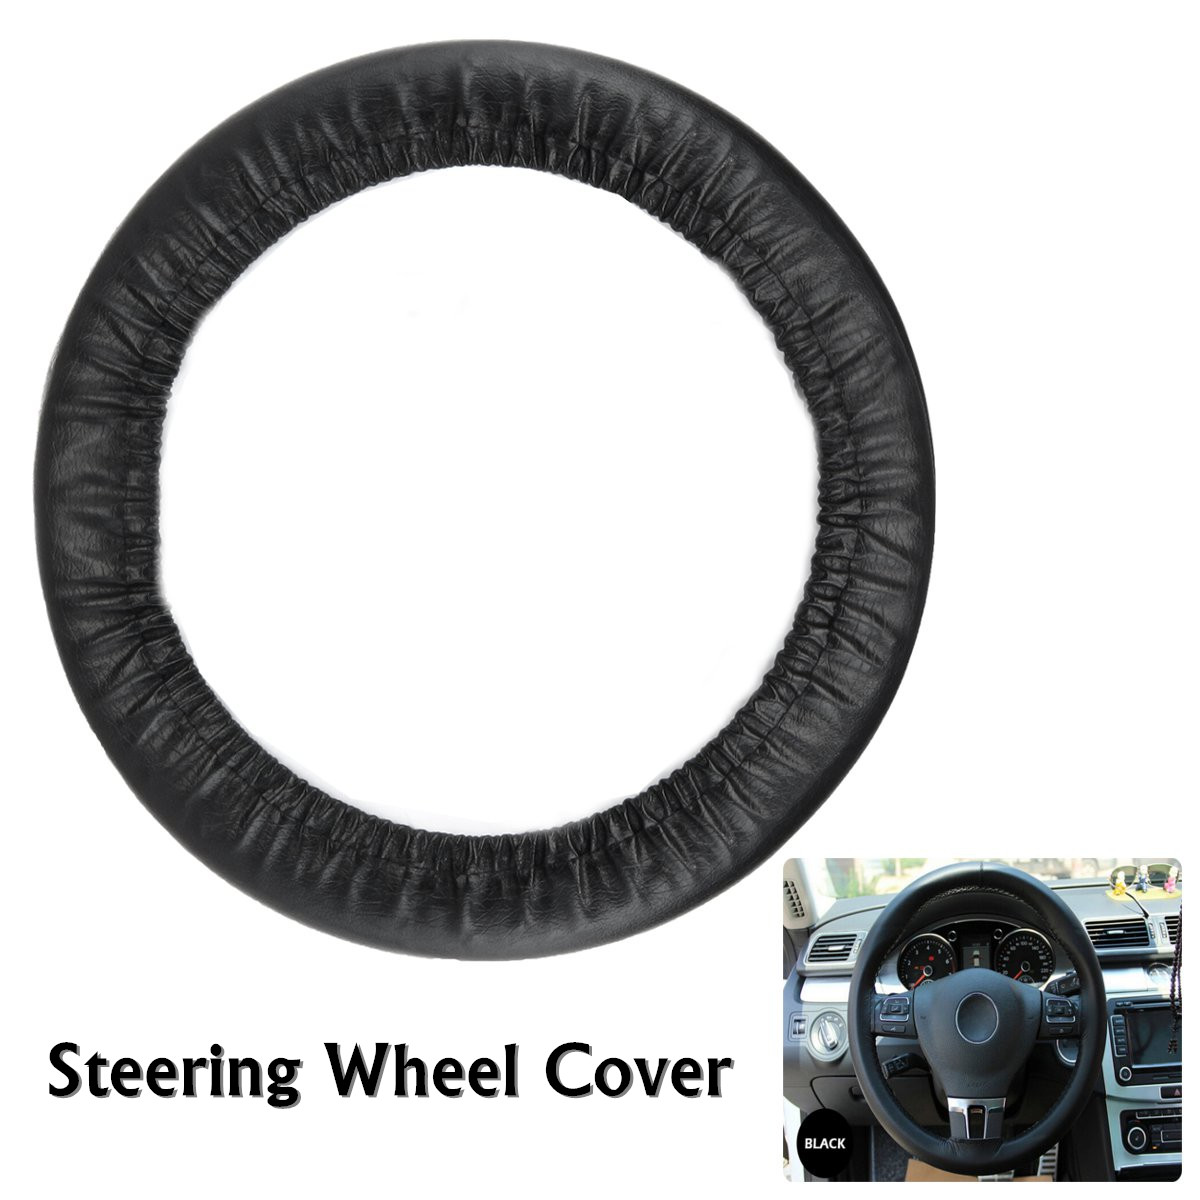 30-to-45cm-Universal-Steering-Wheel-Soft-Grip-Car-Cover-Glove-Protect-Black-1426619